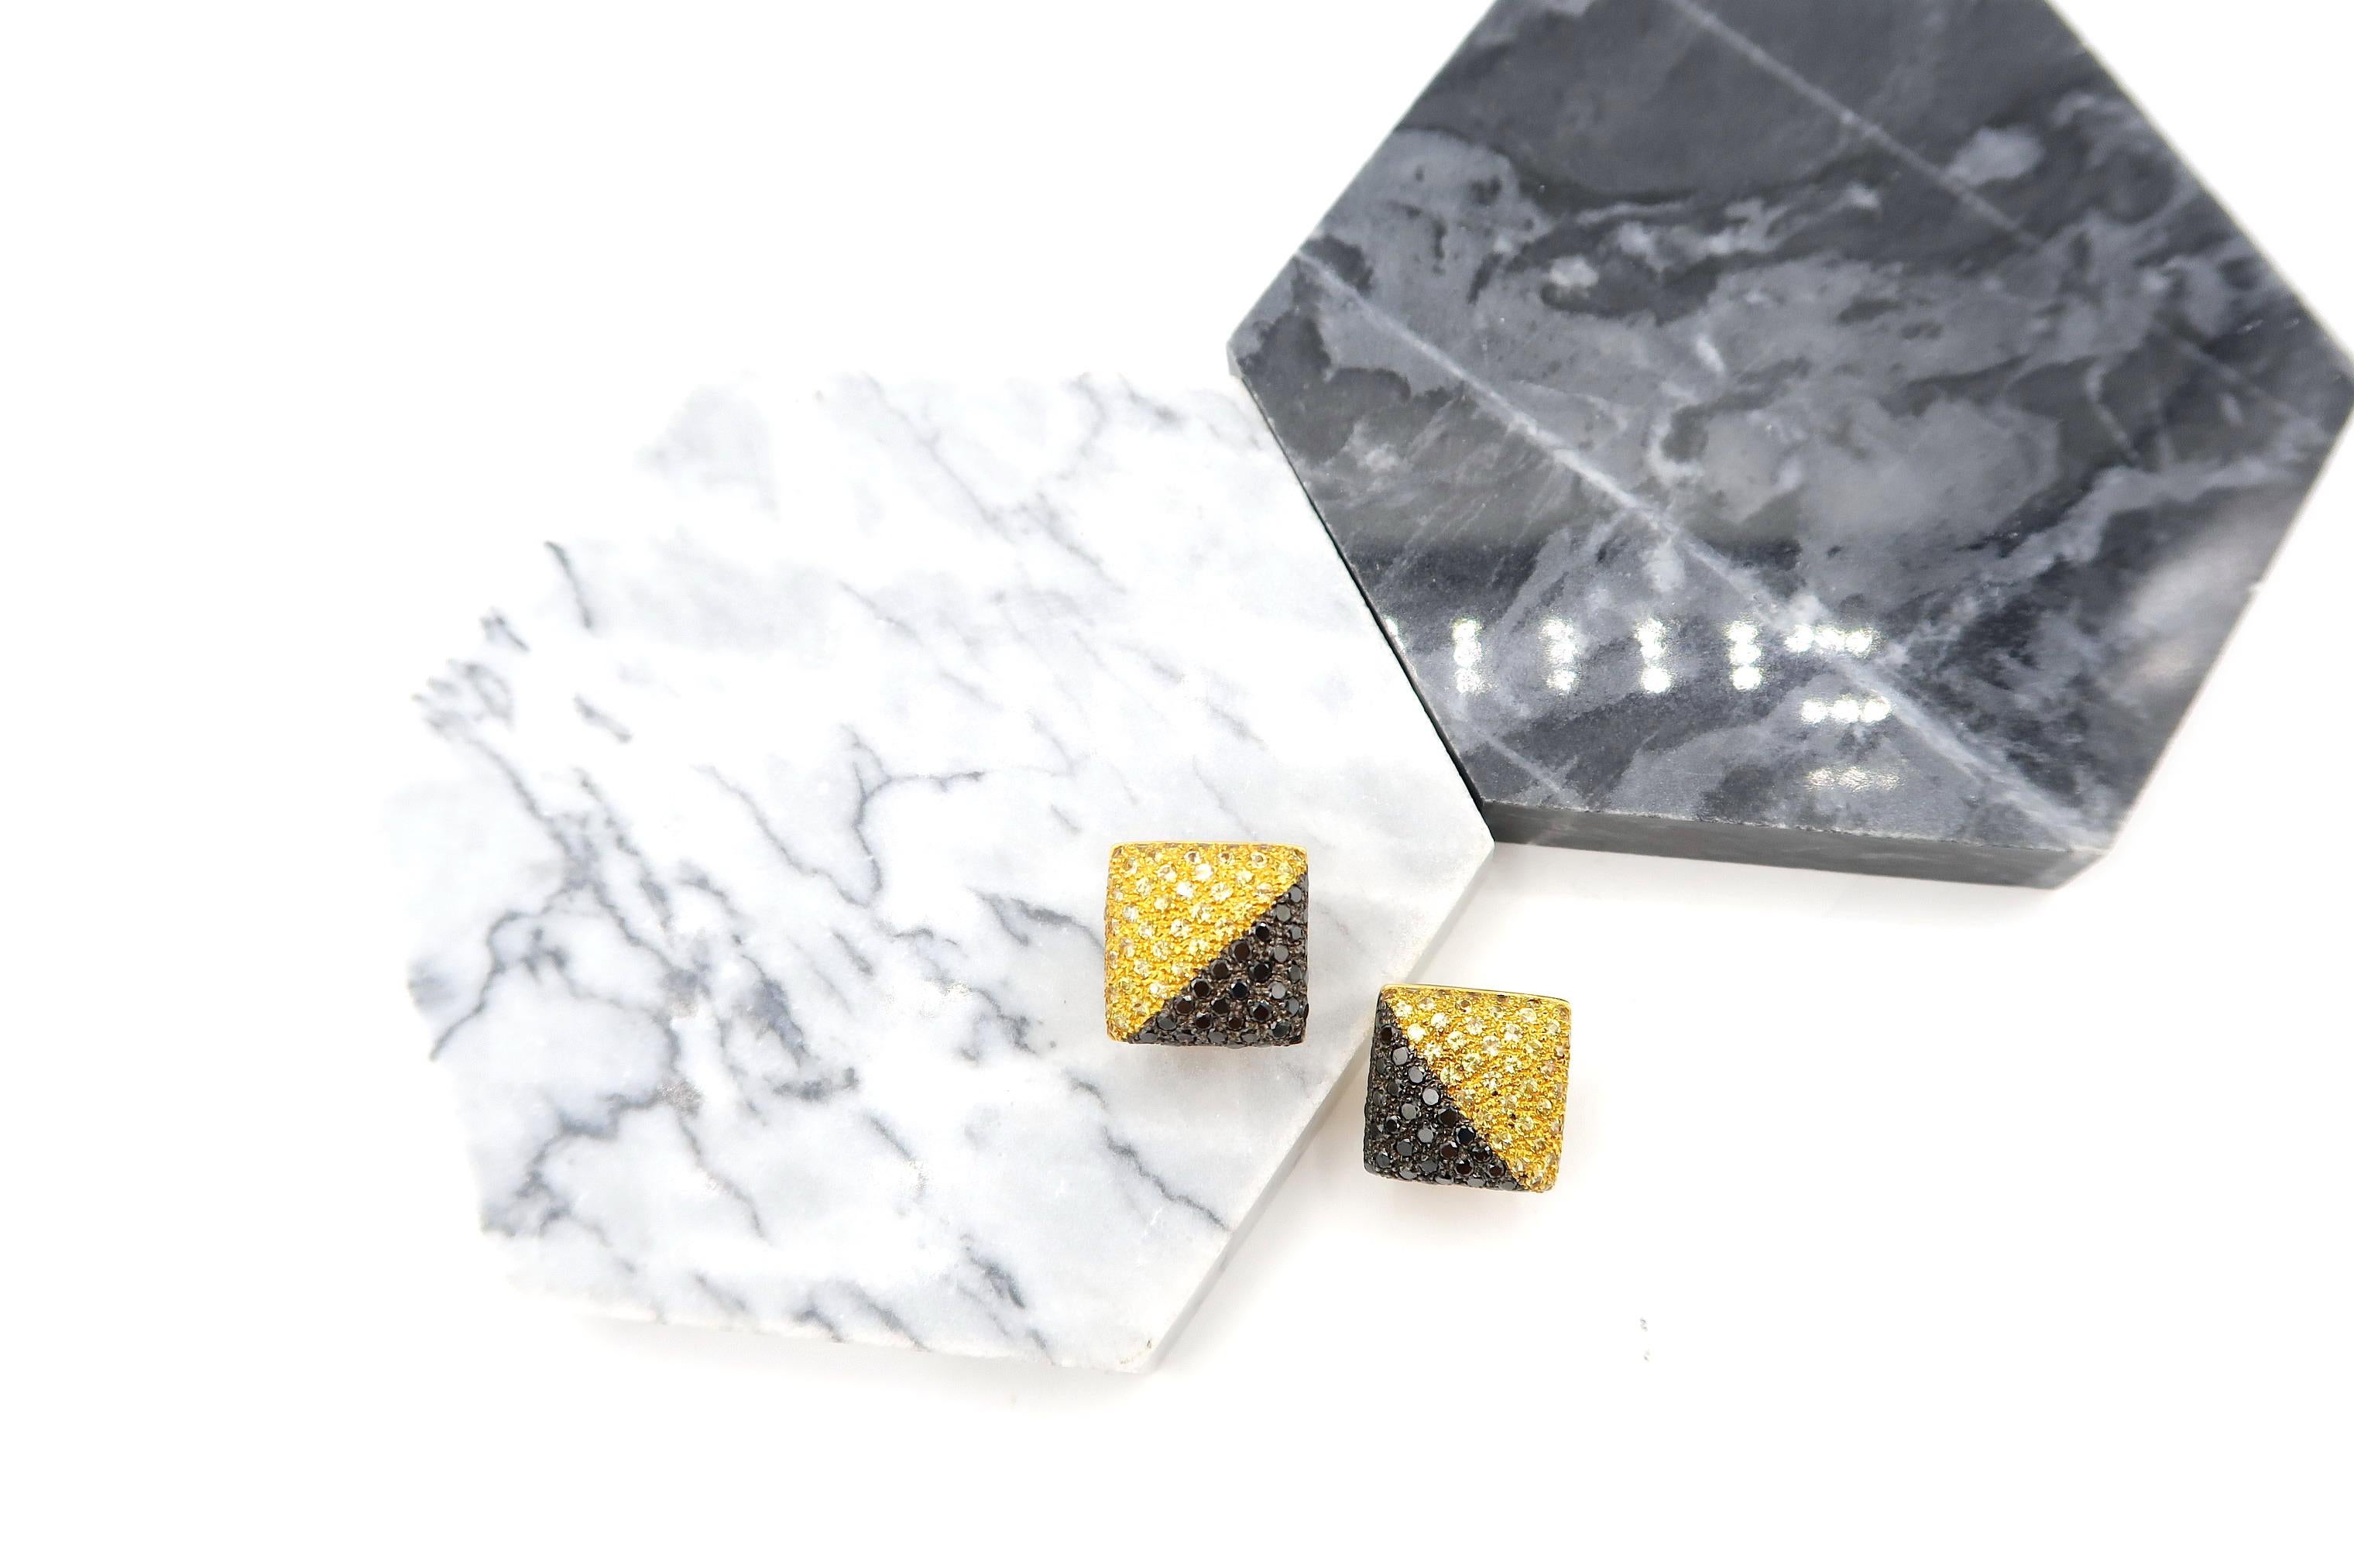 Inflated Square Yellow Sapphire and Black Diamond Pavé Earrings in 18K Yellow Gold

Black Diamond: 1.75ct.
Yellow Sapphire: 2.76cts.
Gold: 18K Gold 11.87g.